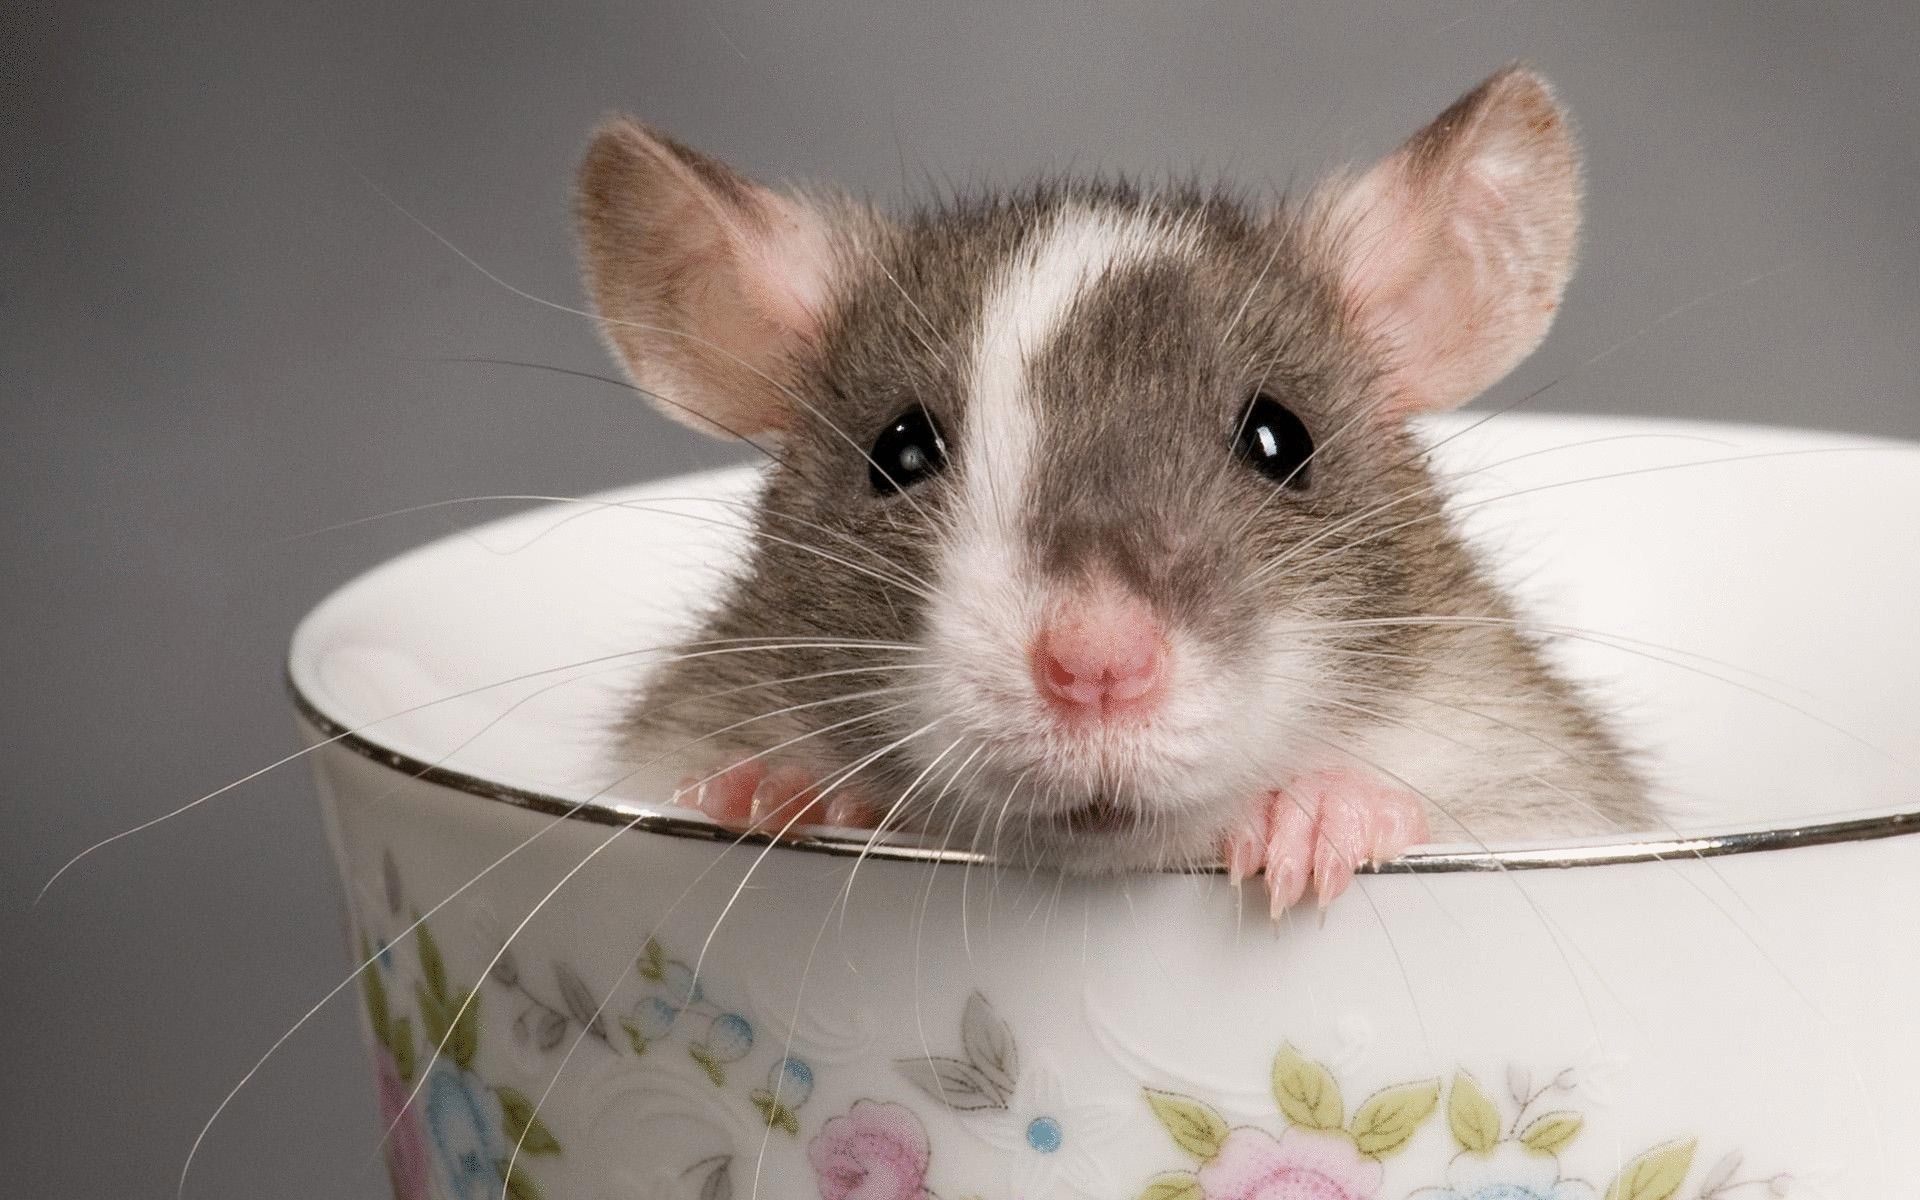 Ranking of the best food for decorative rats in 2022